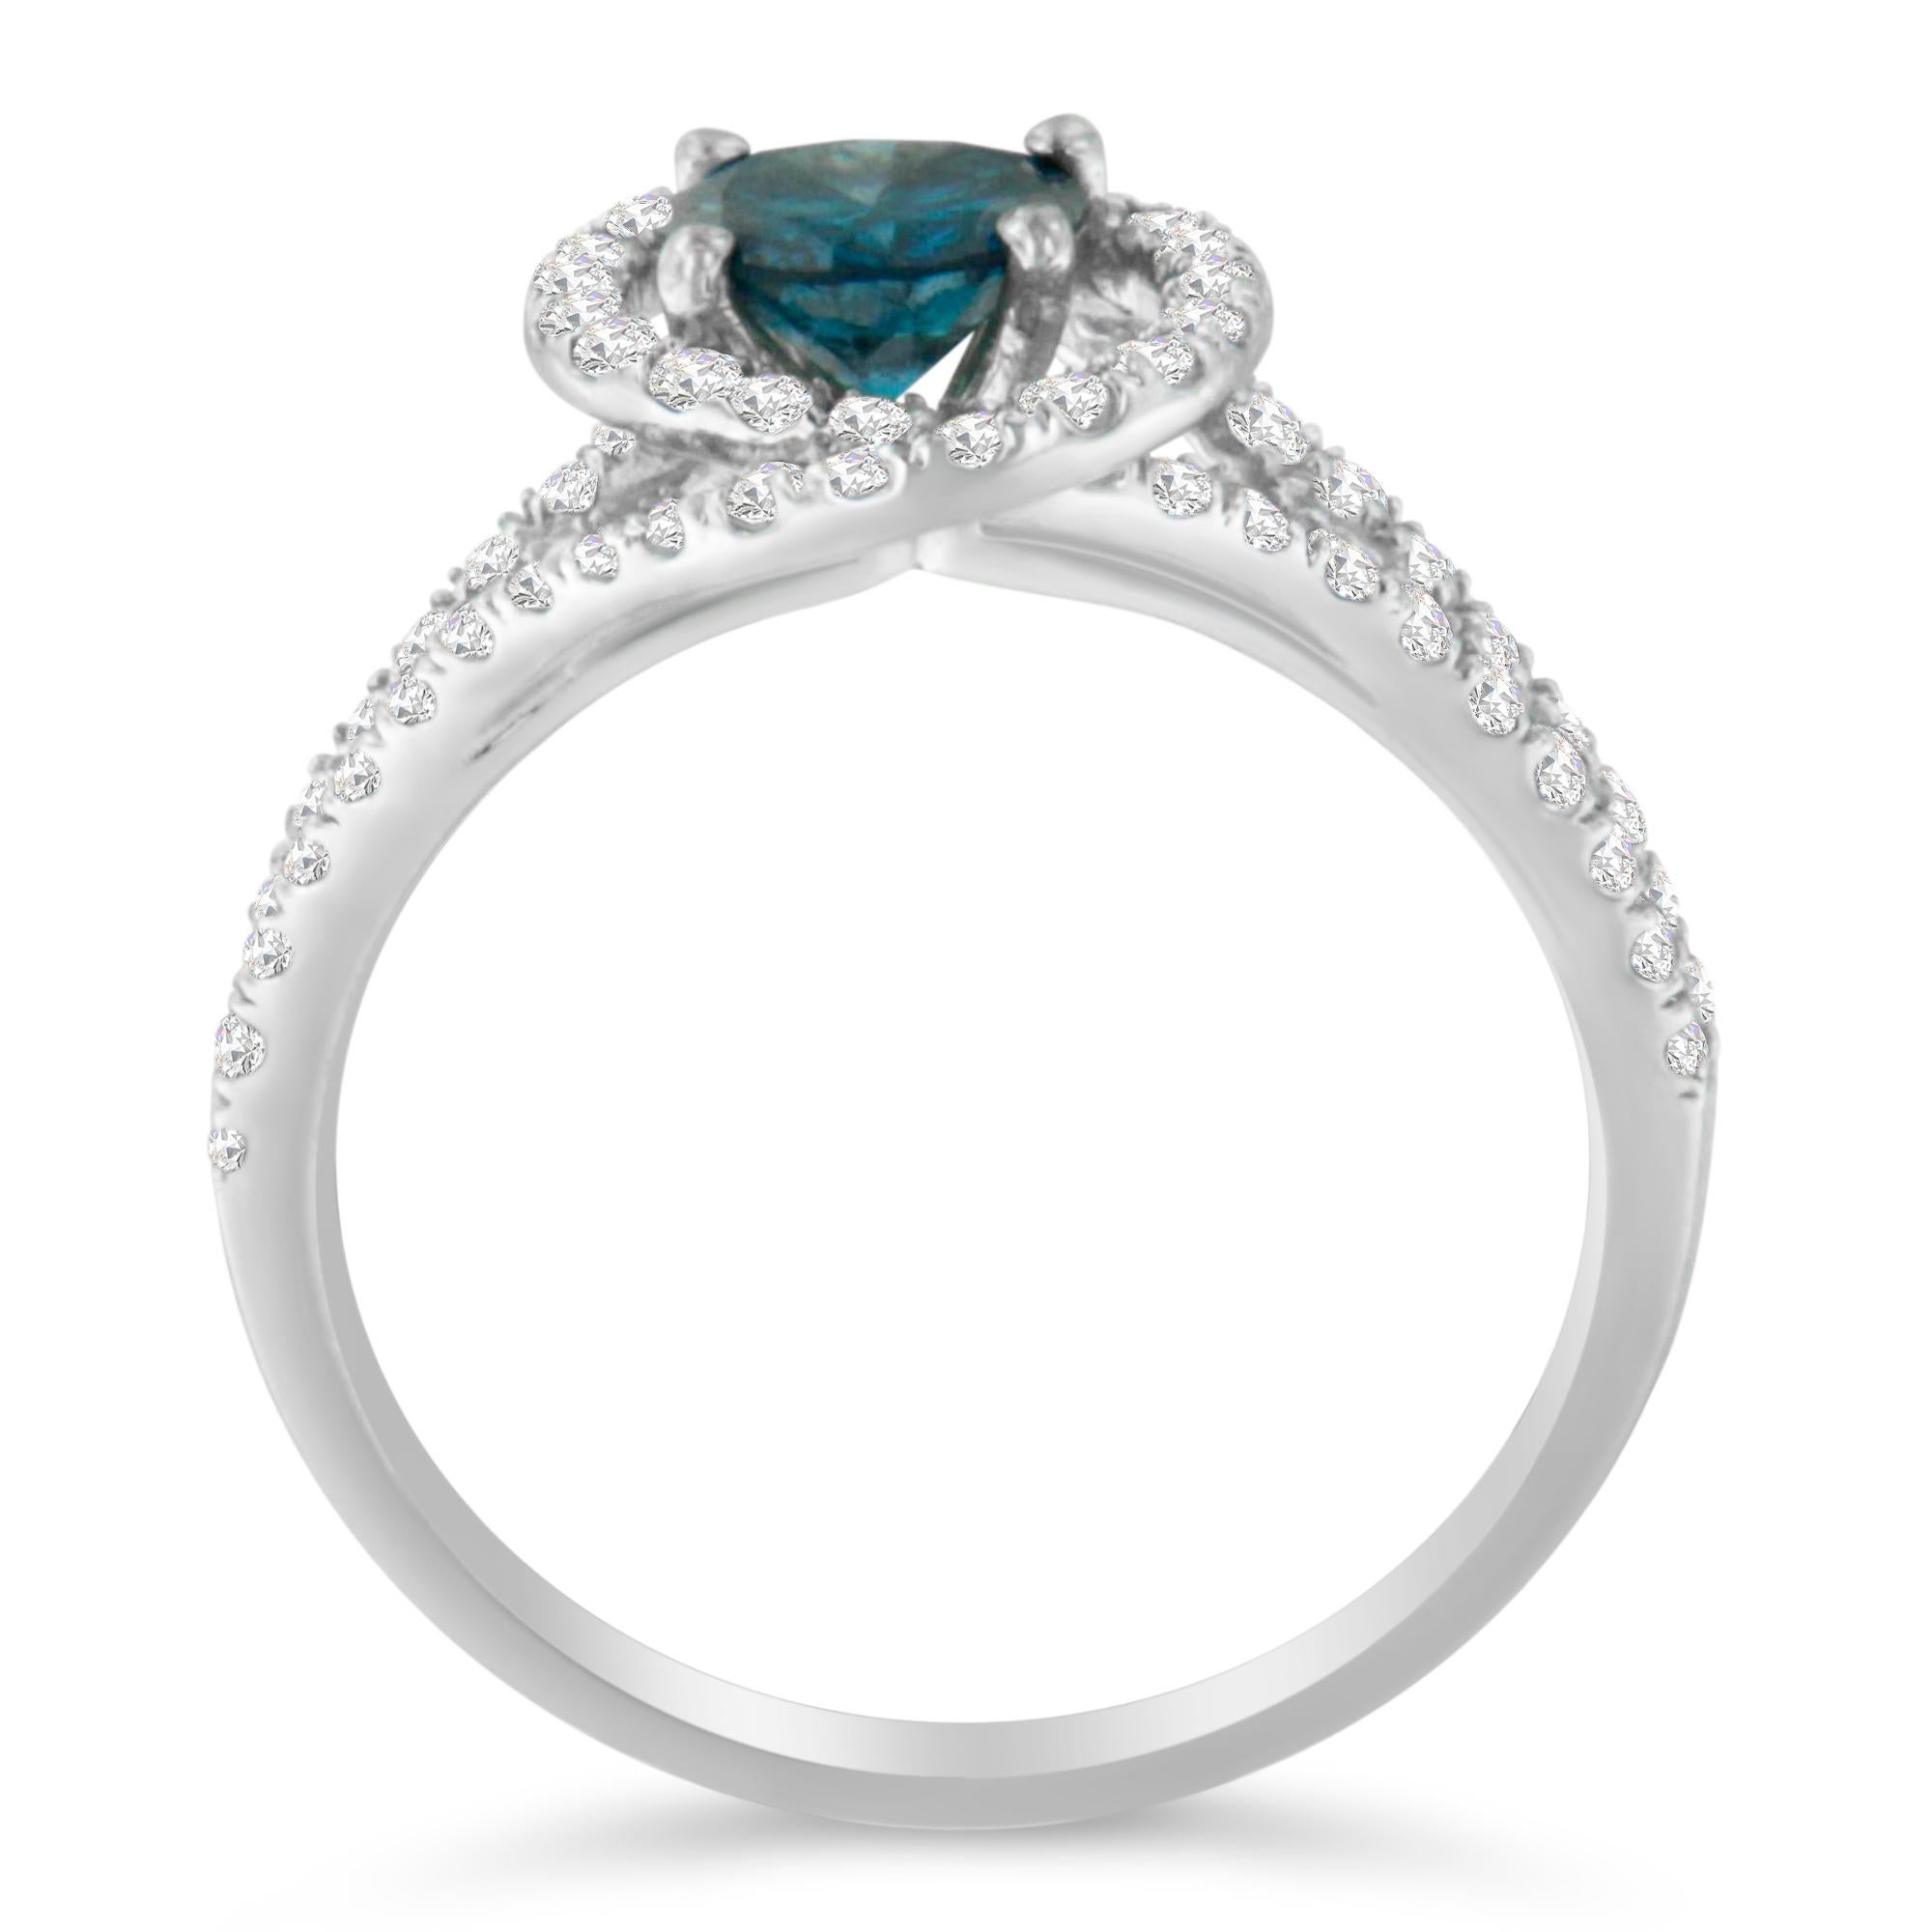 For Sale:  14K White Gold 1 1/3 Carat White & Blue Diamond Halo Cocktail Statement Ring 3